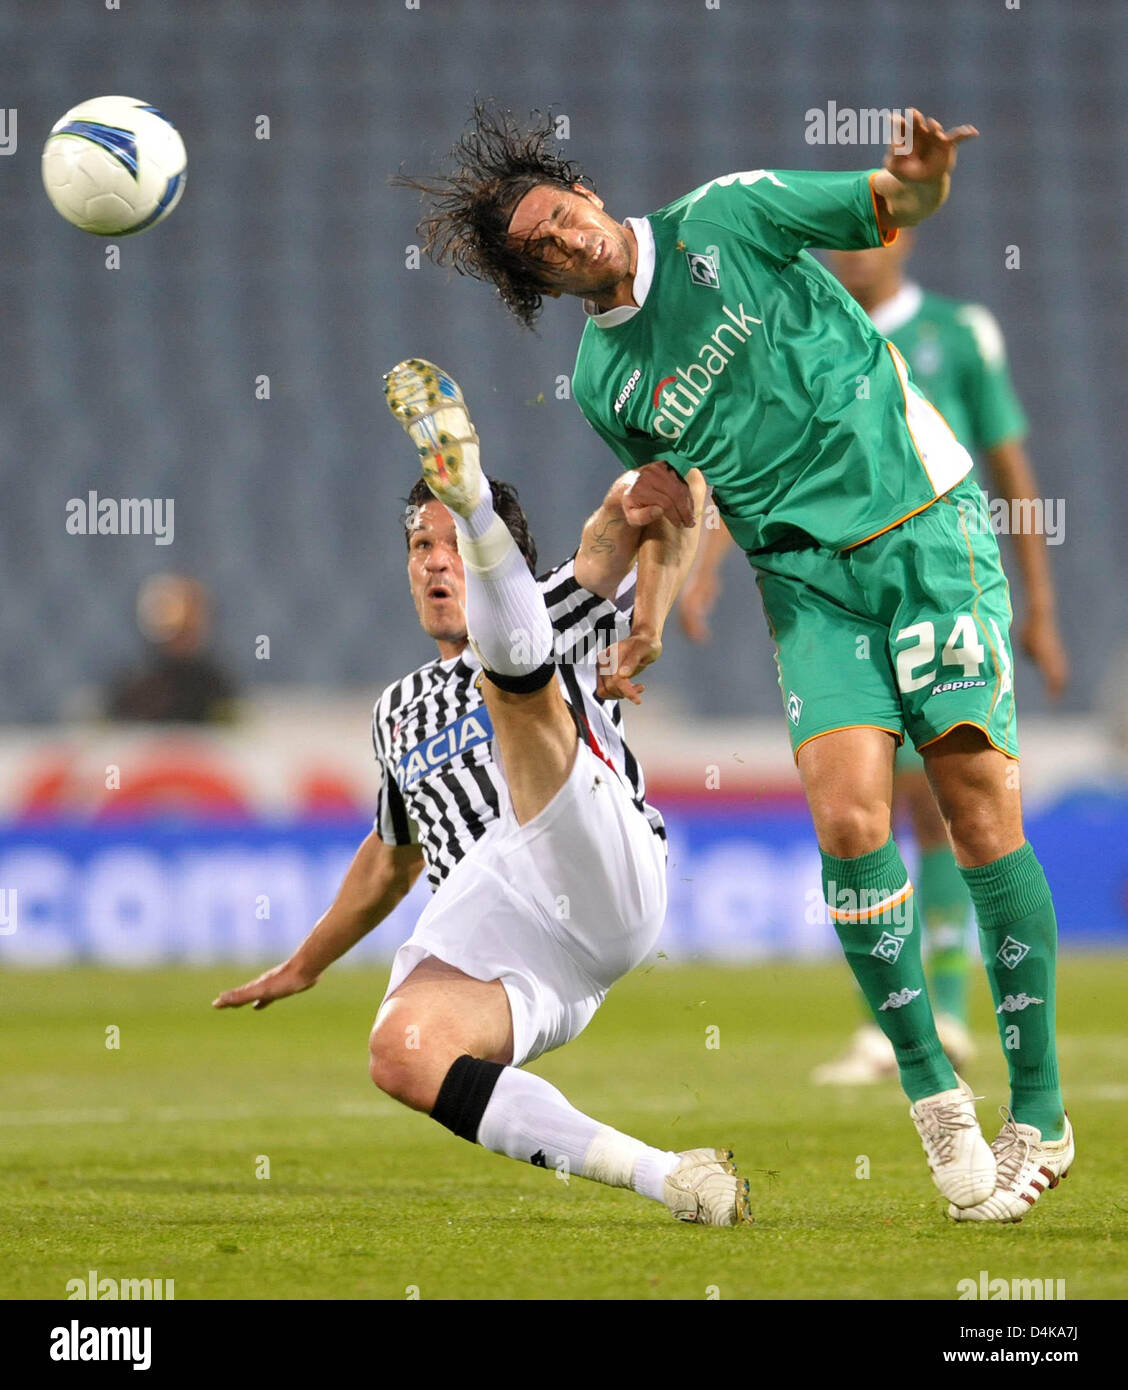 Bremen?s Claudio Pizarro (R) vies for the ball with Udinese?s Gaetano D?Agostino during the UEFA Cup quarter finals second leg match Udinese vs Werder Bremen at Stadio Friuli in Udine, Italy, 16 April 2009. The match tied 3-3. Photo: Carmen Jaspersen Stock Photo